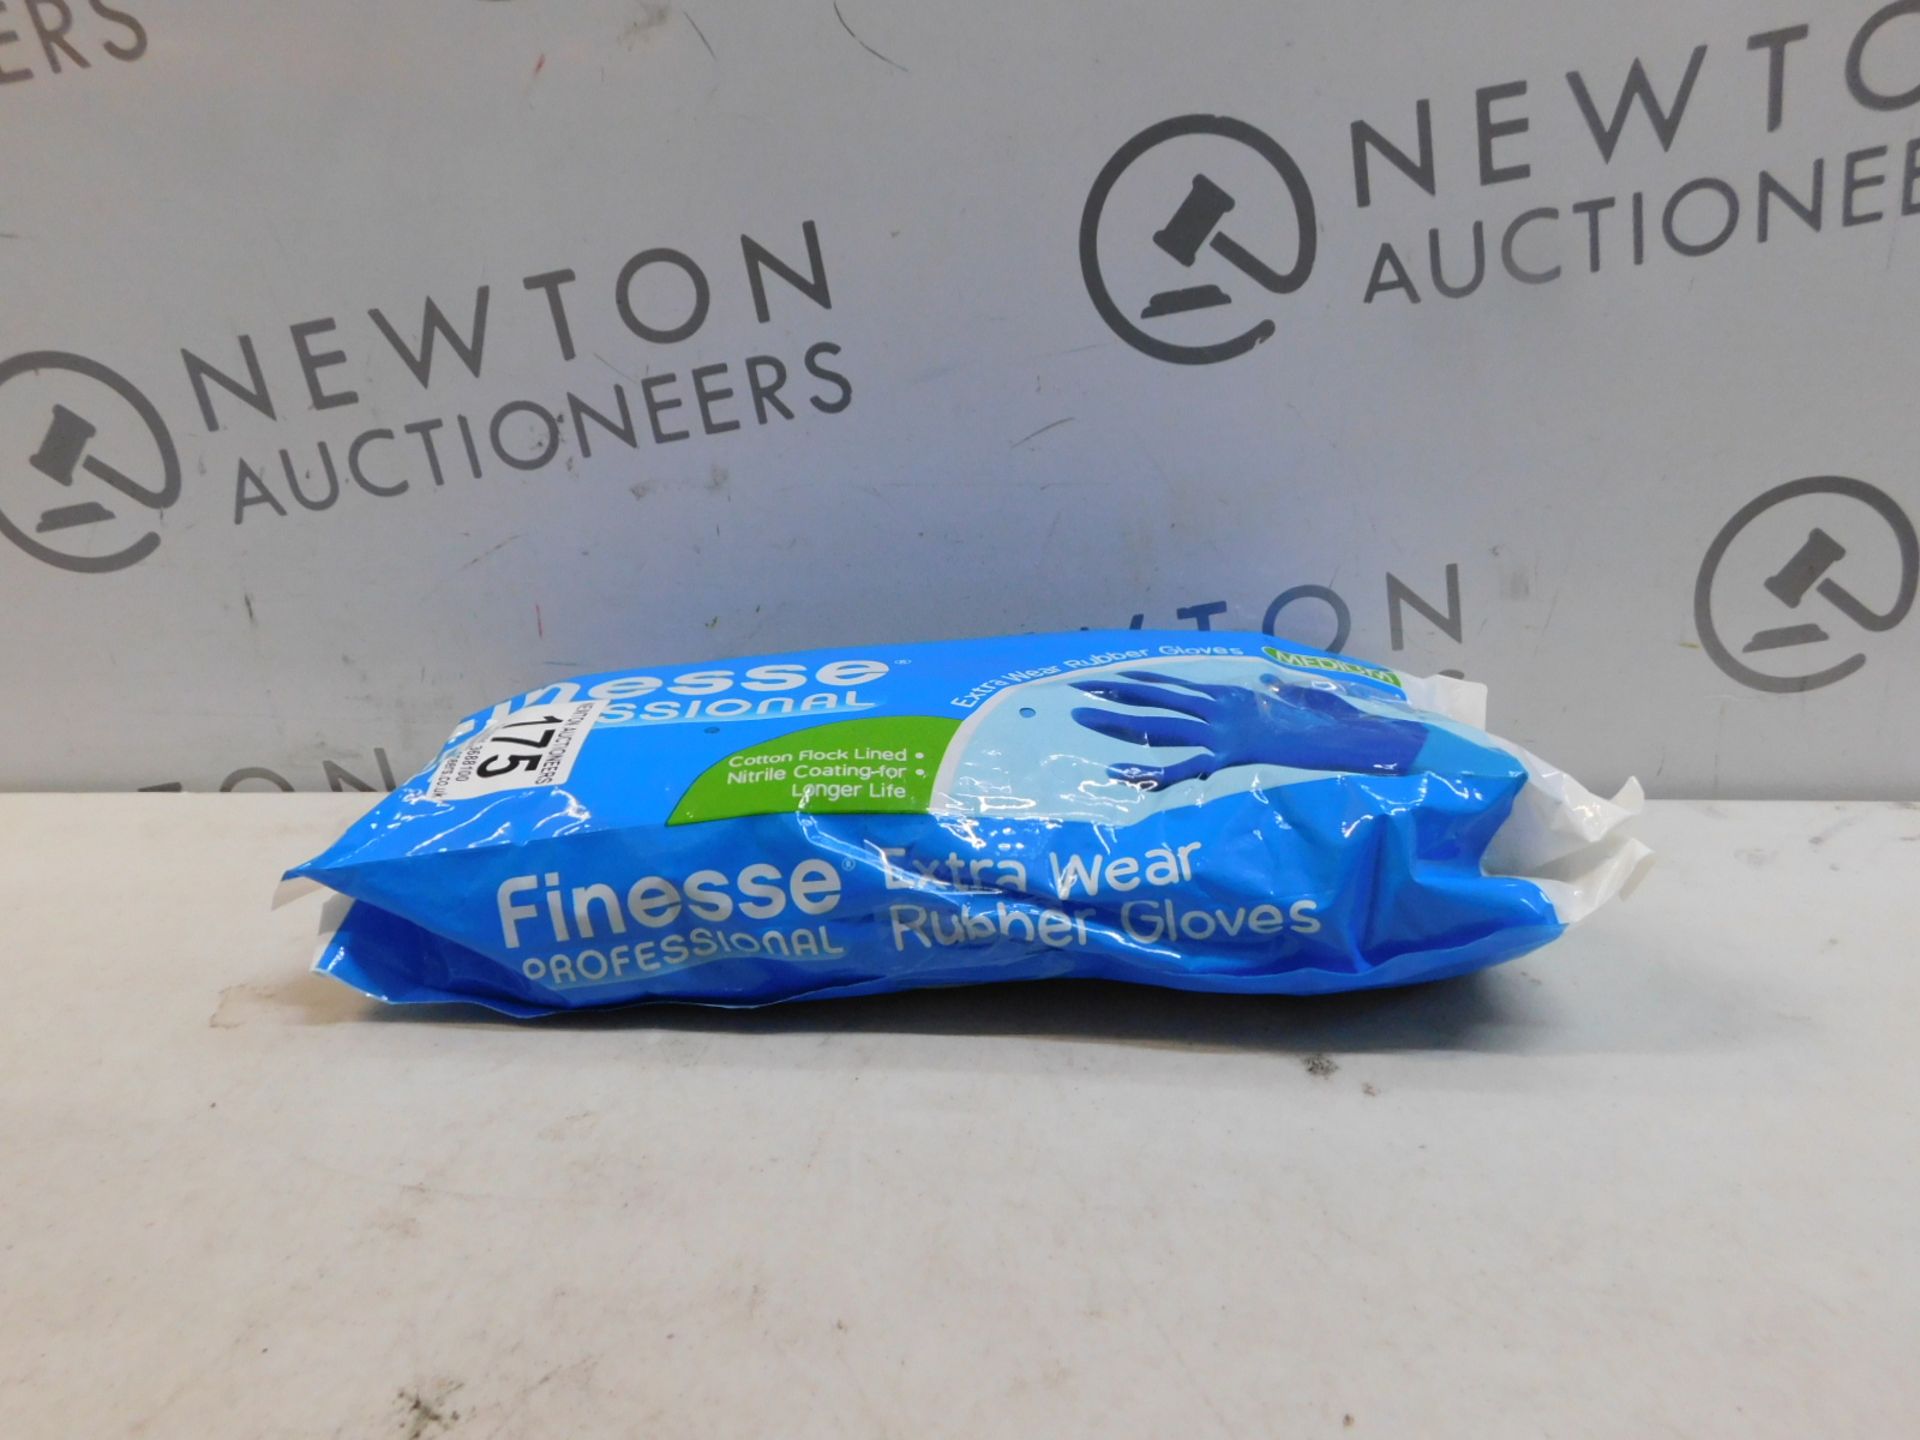 1 PACK OF FINESSE PROFESSIONAL EXTRA WEAR RUBBER GLOVES RRP Â£12.99